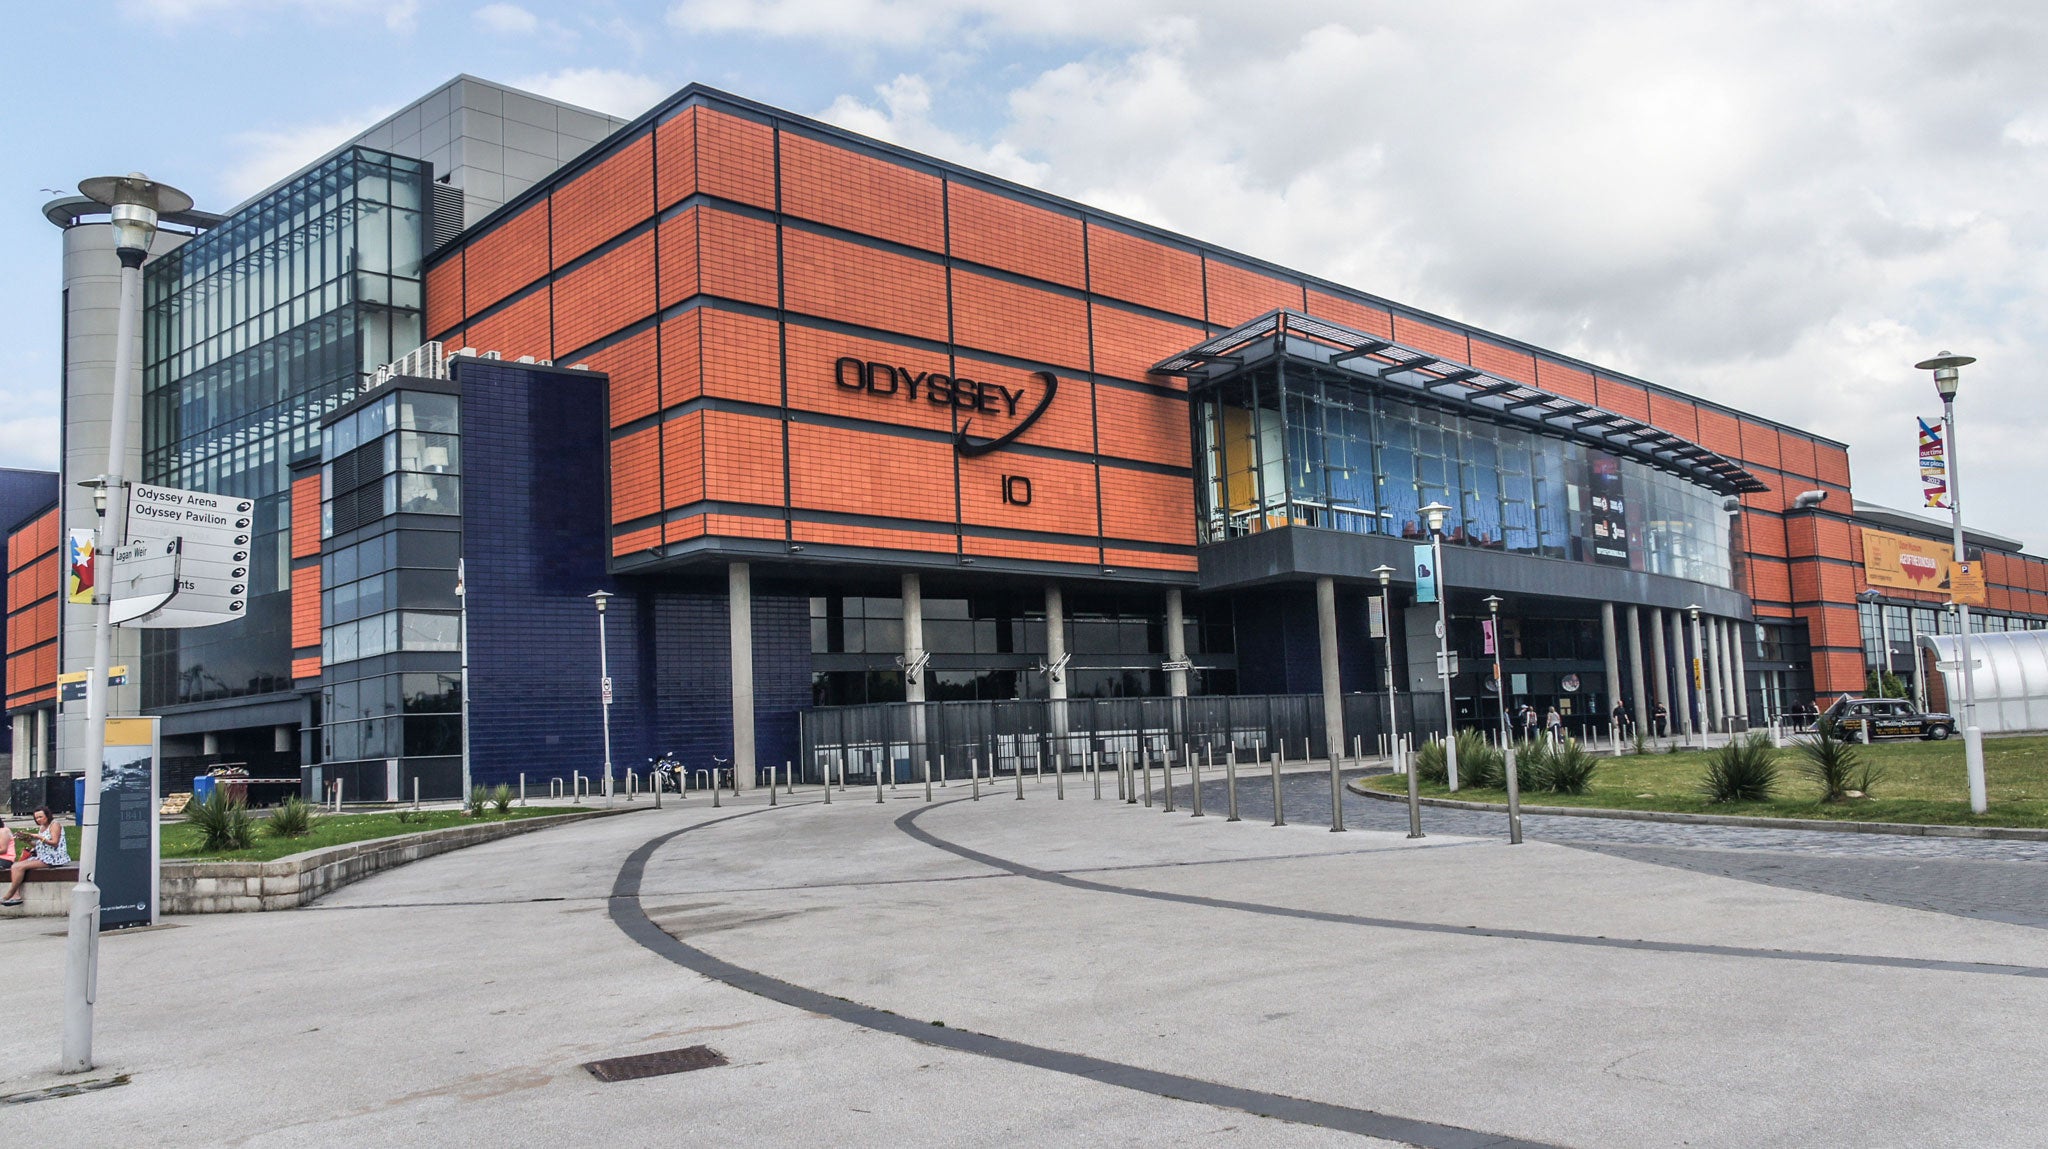 The Odyssey Arena in Belfast